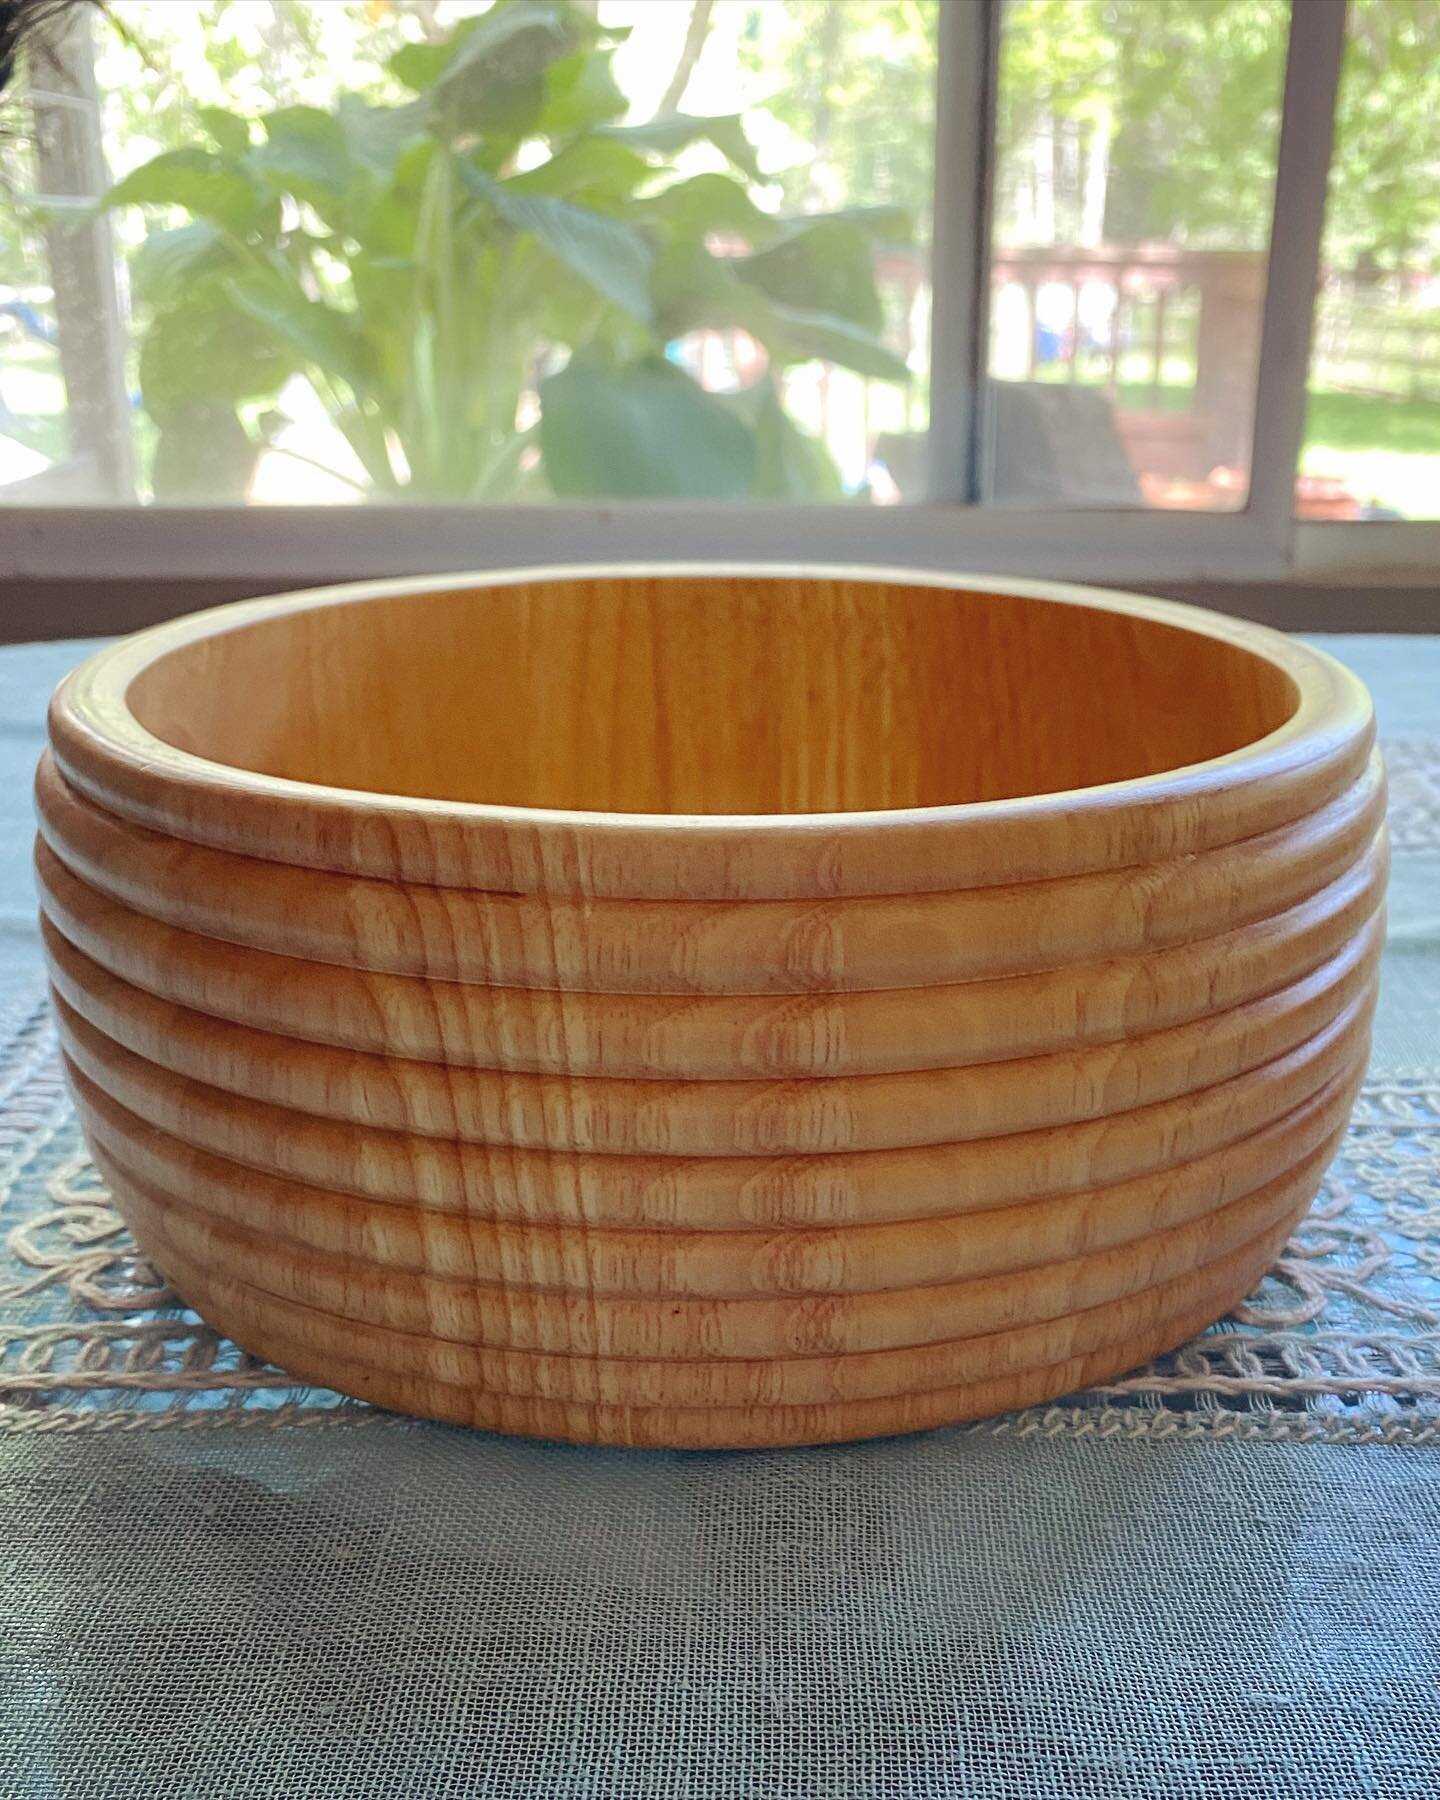 ✨FOR SALE:✨
Deep wood bowl with beautiful grain. I love the color of this wood and I like the ribbed detail on the outside. It reminds me of a beehive. This is a great bowl for fruit or whatever you want to use it for! Perfect condition.
9.5&rdquo; w